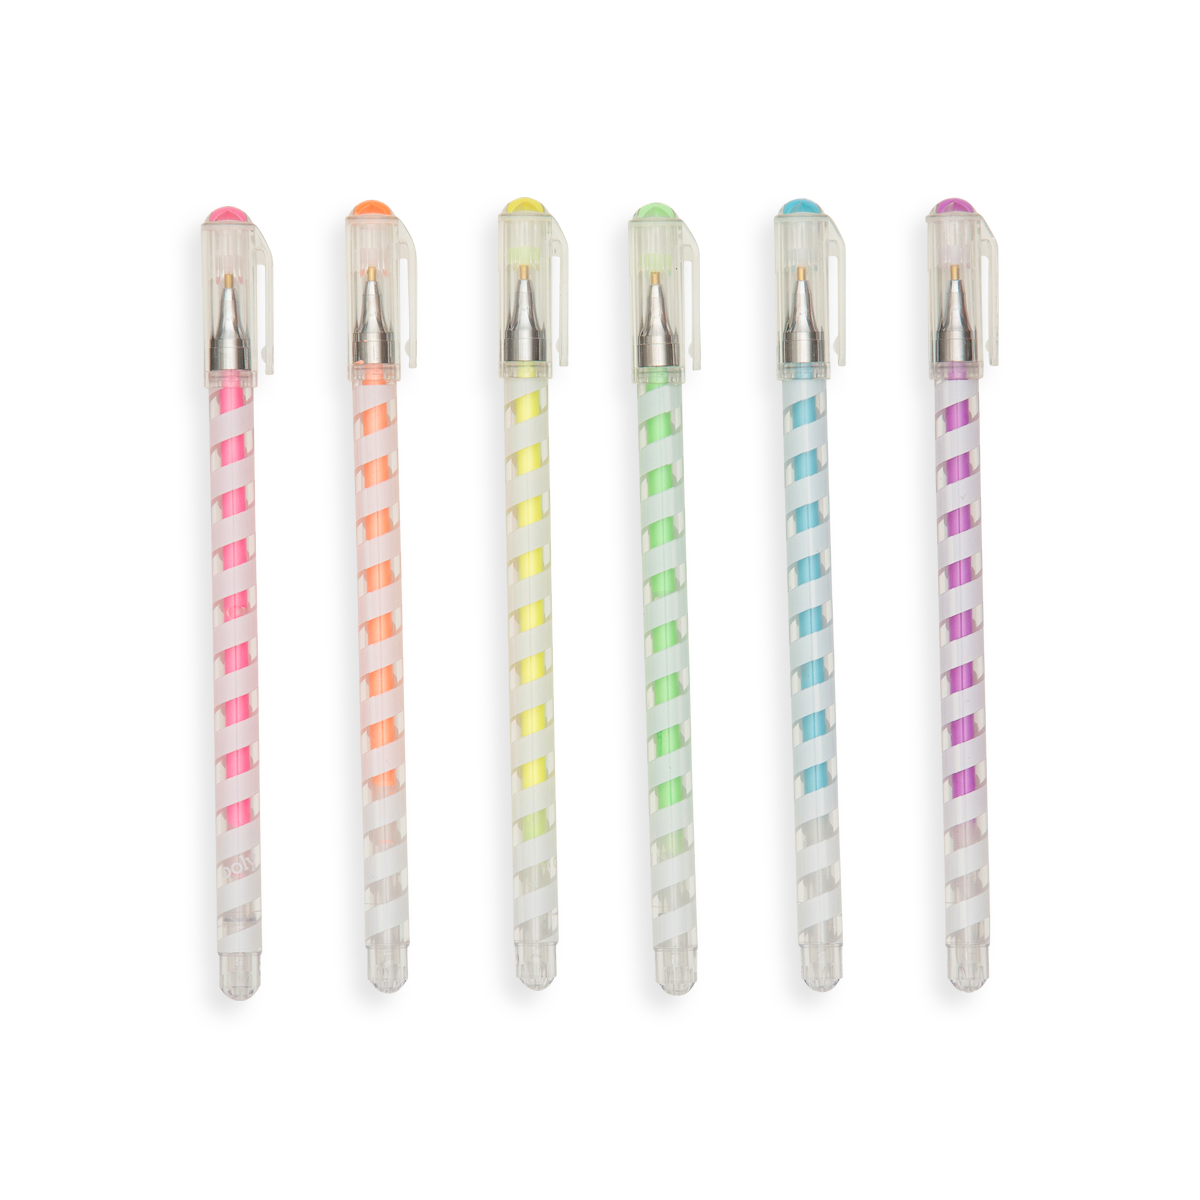 Totally Taffy Scented Gel Pens lined up in a row